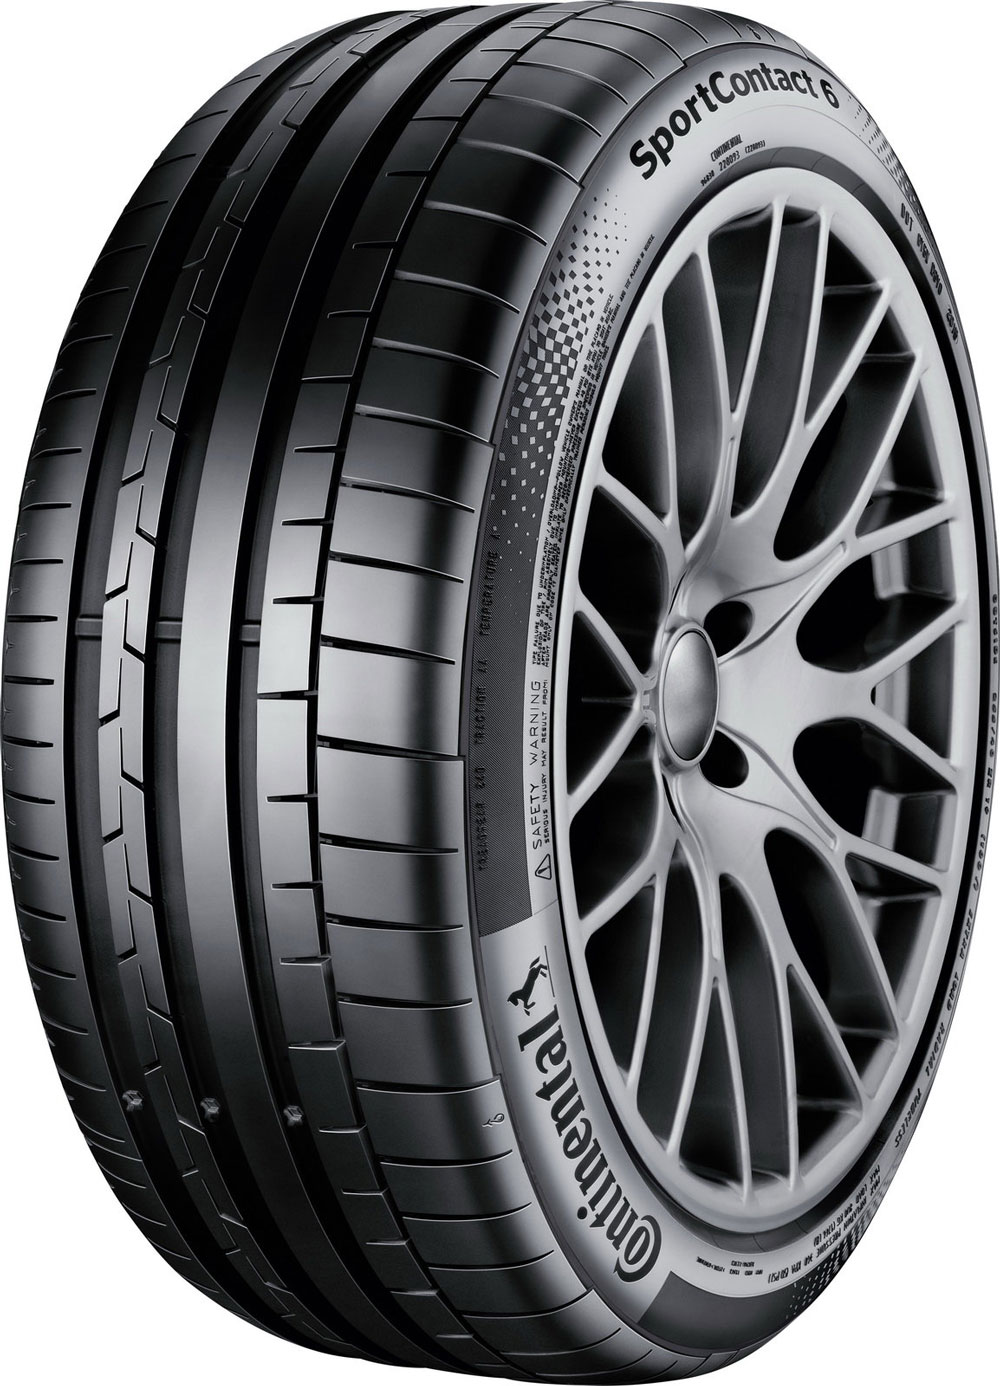 Гуми за кола CONTINENTAL SPORT CONTACT 6 XL 265/40 R20 104Y